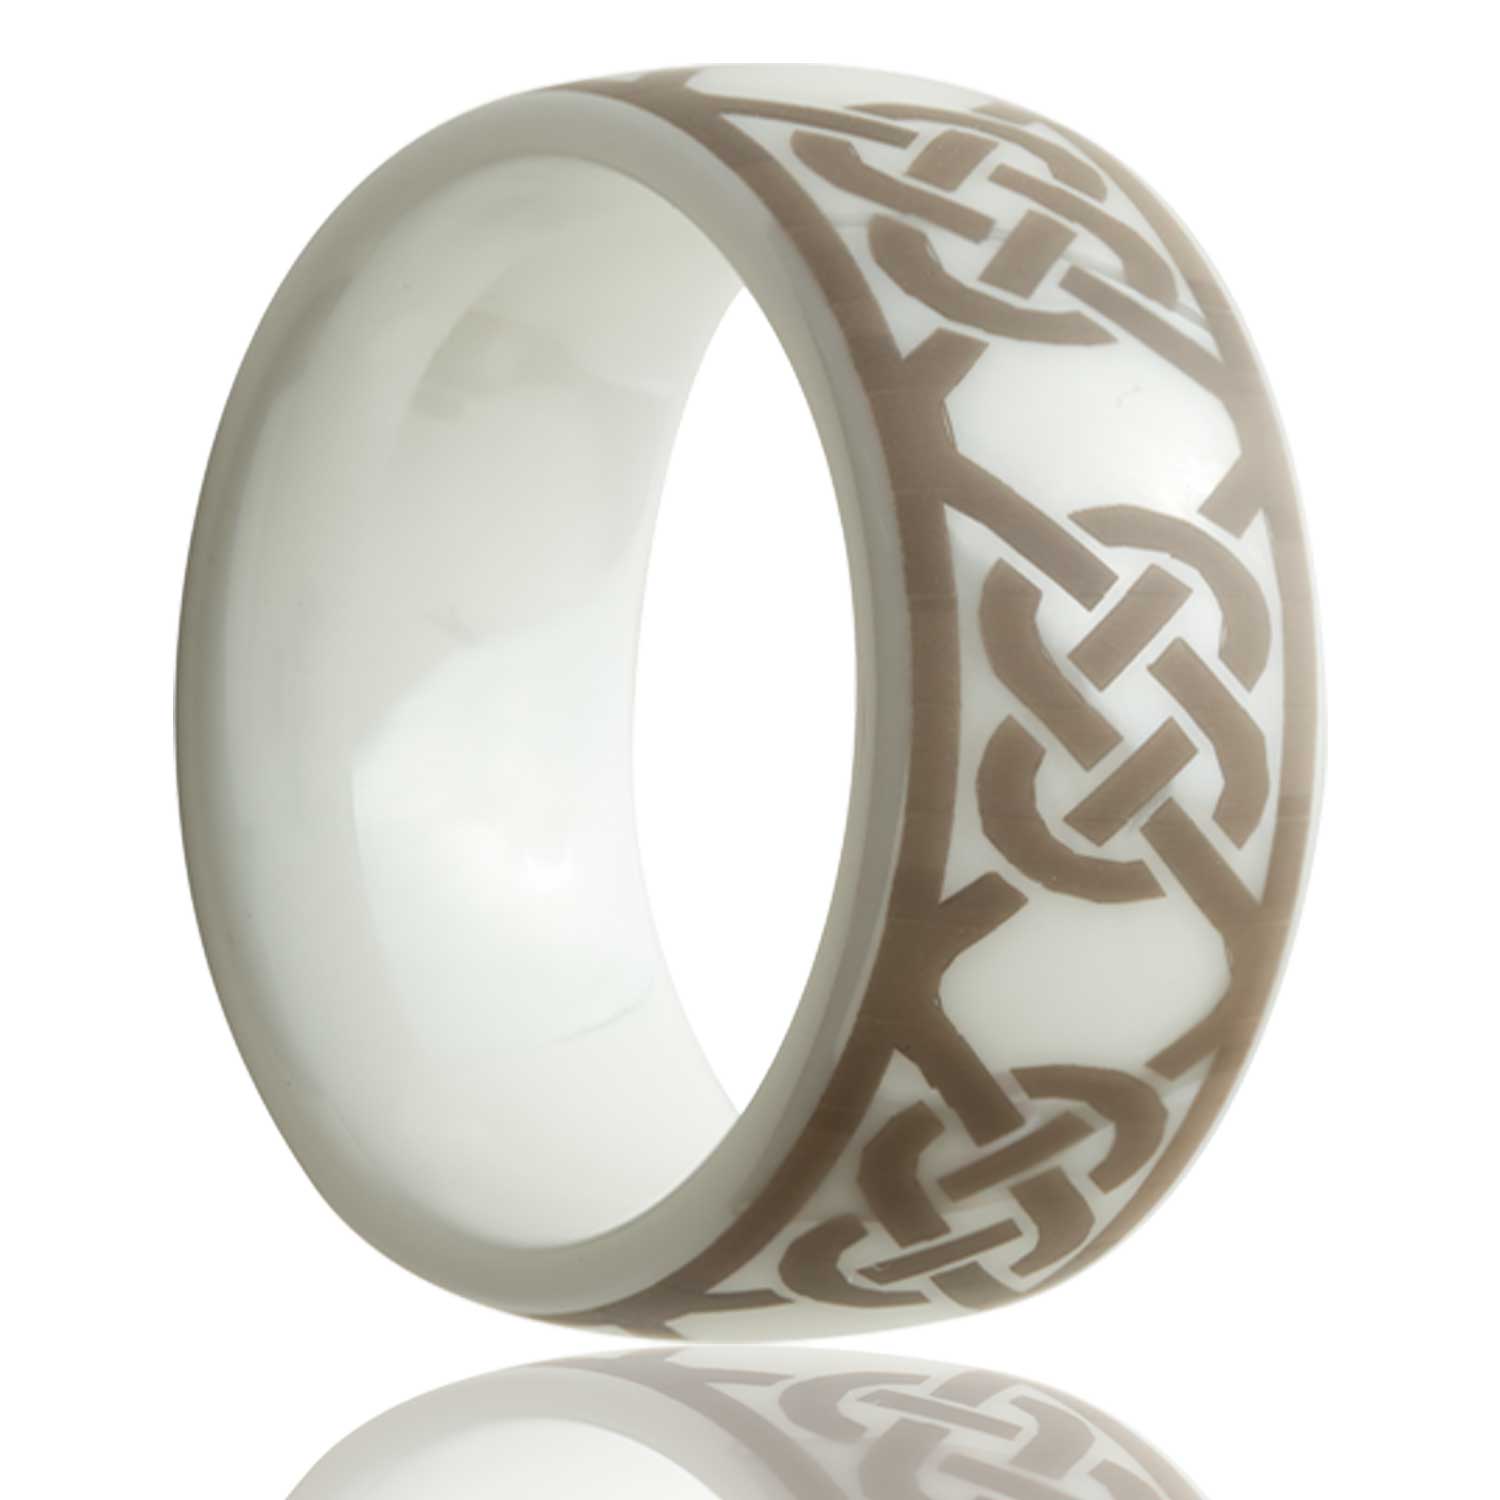 A celtic twist knot domed white ceramic men's wedding band displayed on a neutral white background.